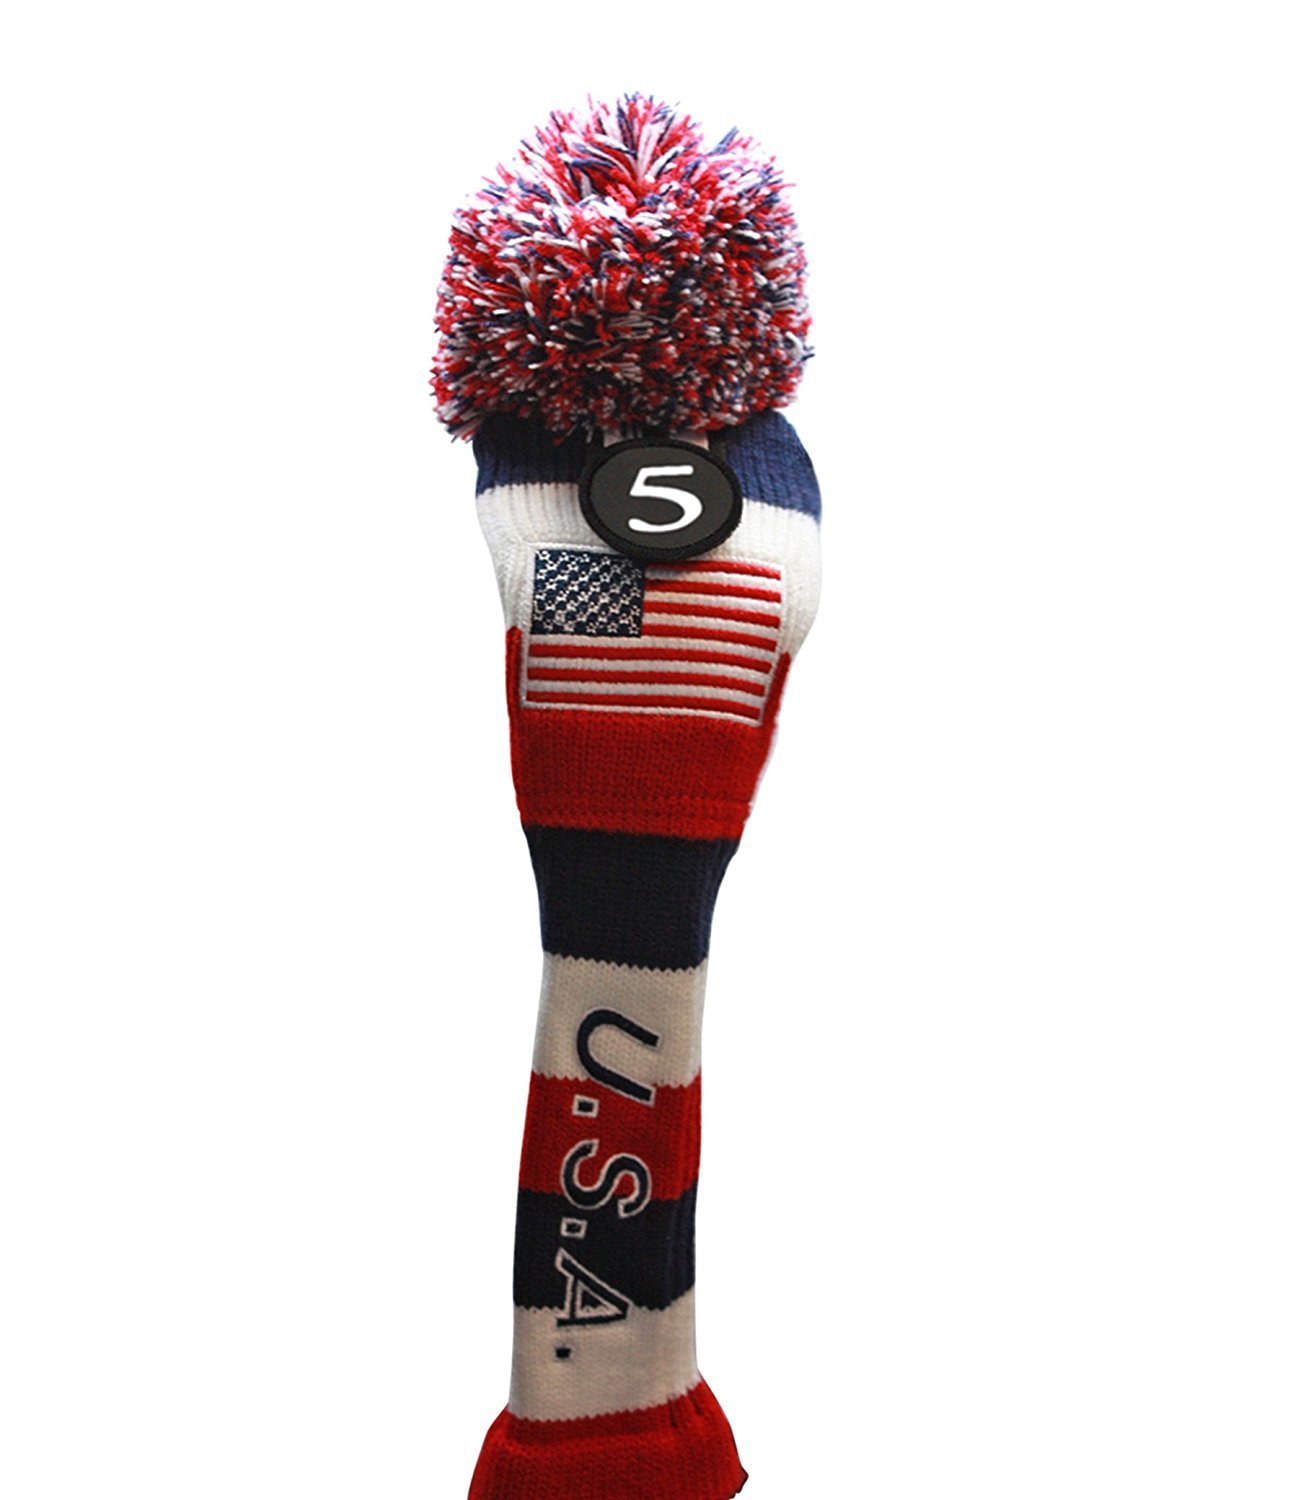 USA Majek Golf Driver 1 3 5 X Fairway Woods Headcovers Pom Pom Knit Limited Edition Vintage Classic Traditional Flag Stars Red White Blue Stripes Retro Head Cover Fits 460cc Drivers and 260cc Woods - image 4 of 8